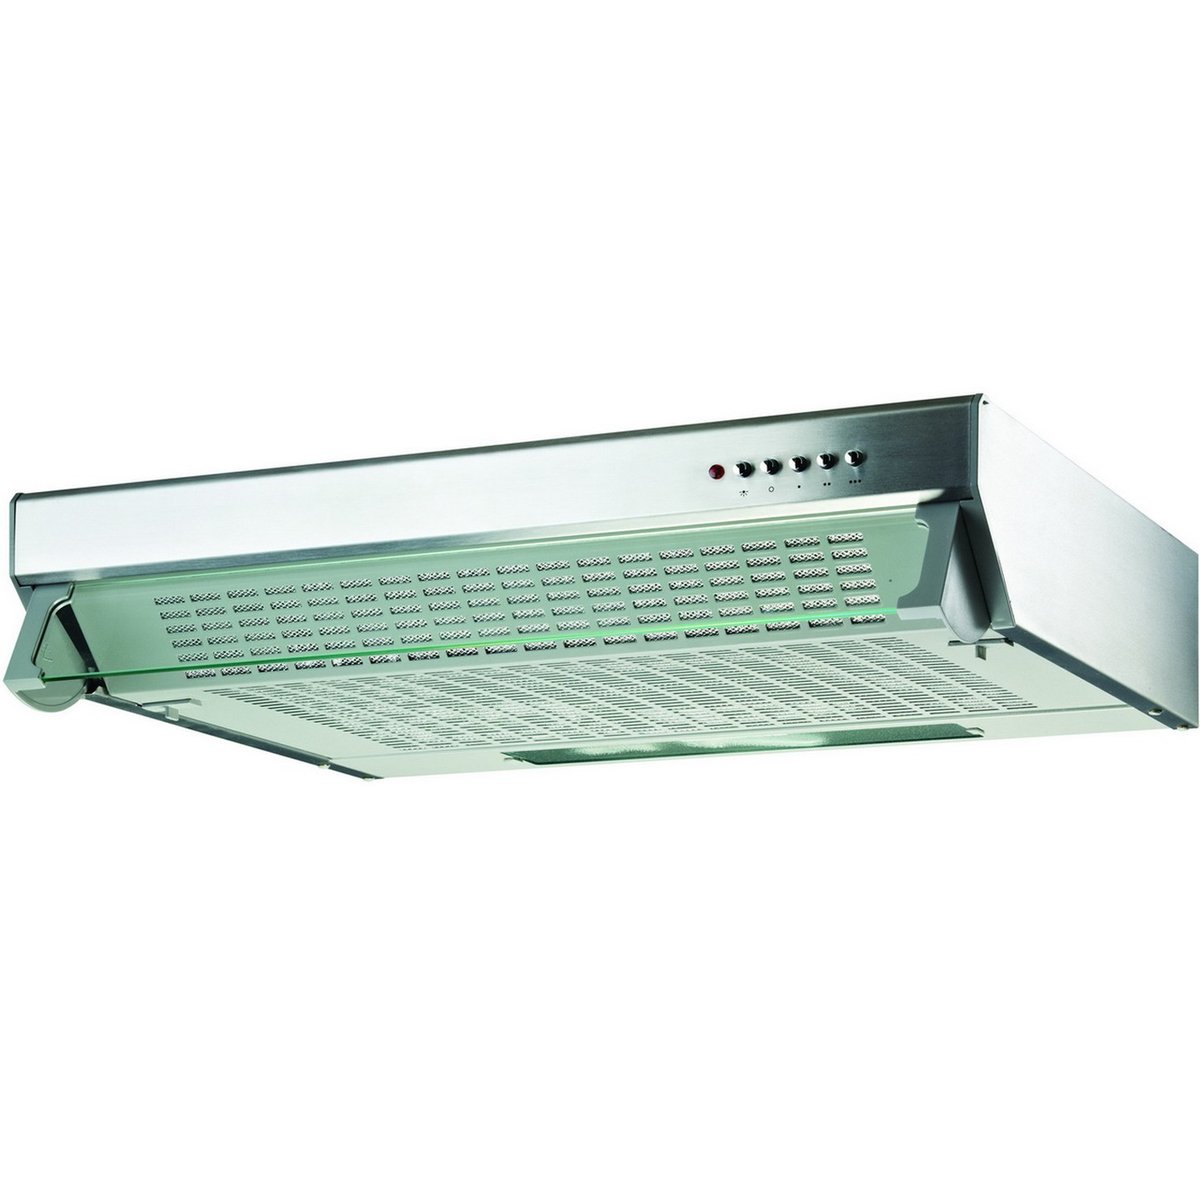 Fagor Conventional Cooker Hood, 60 cm, Stainless Steel, AF3607XA